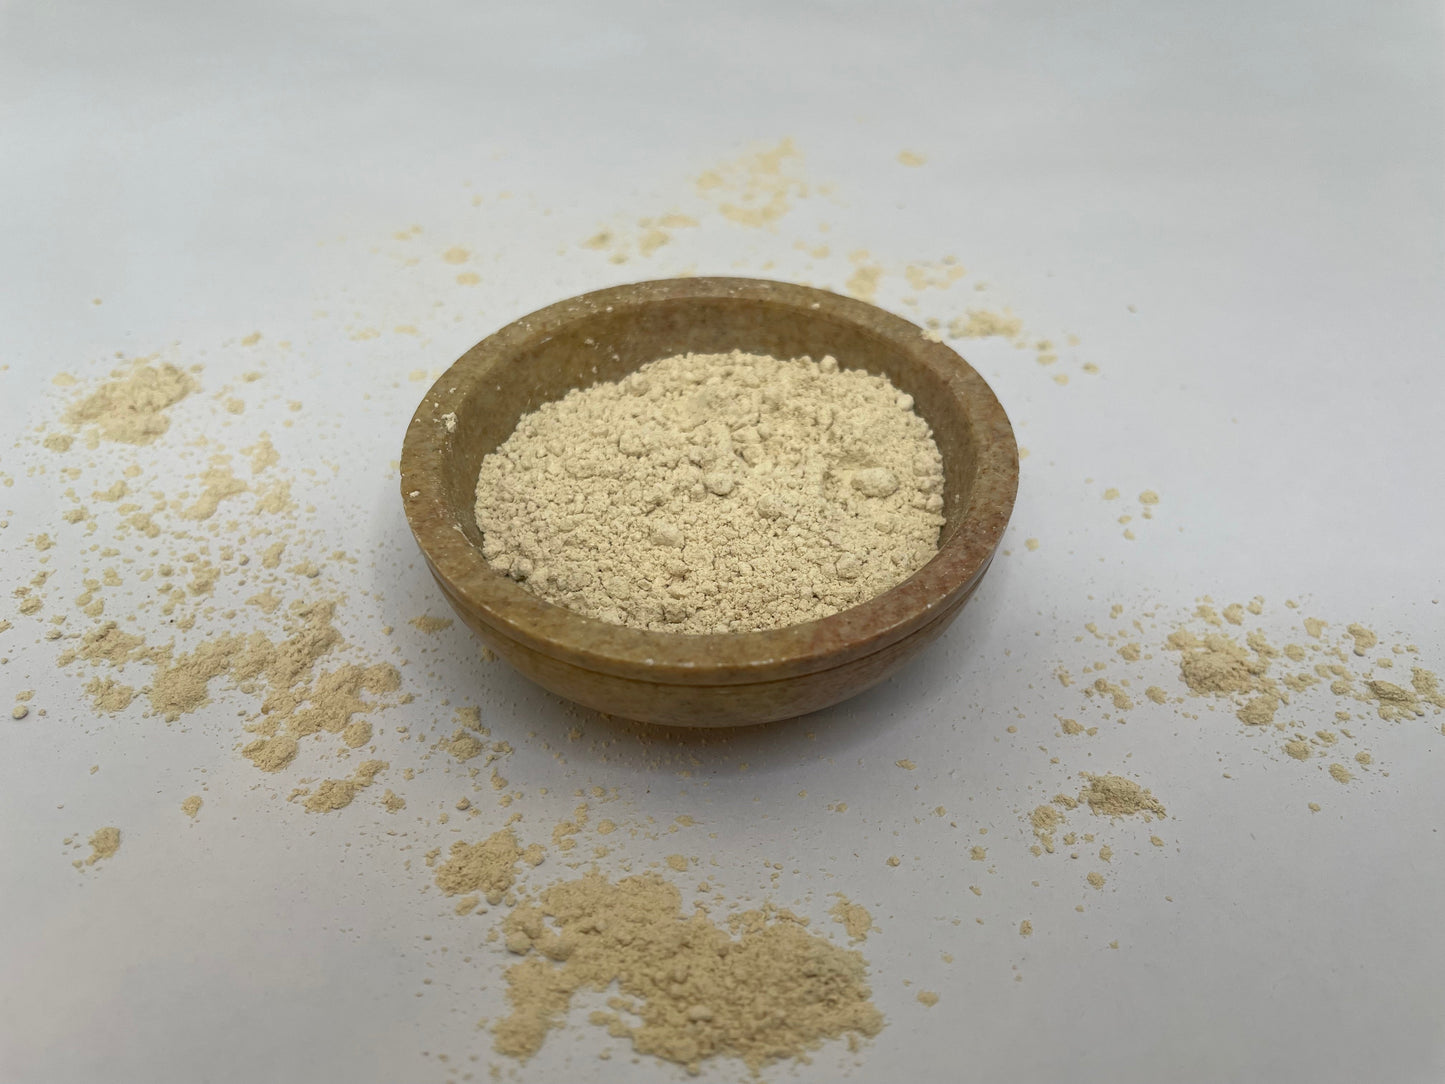 Marshmallow Powdered Herb - Althea officinalis (root, powdered)